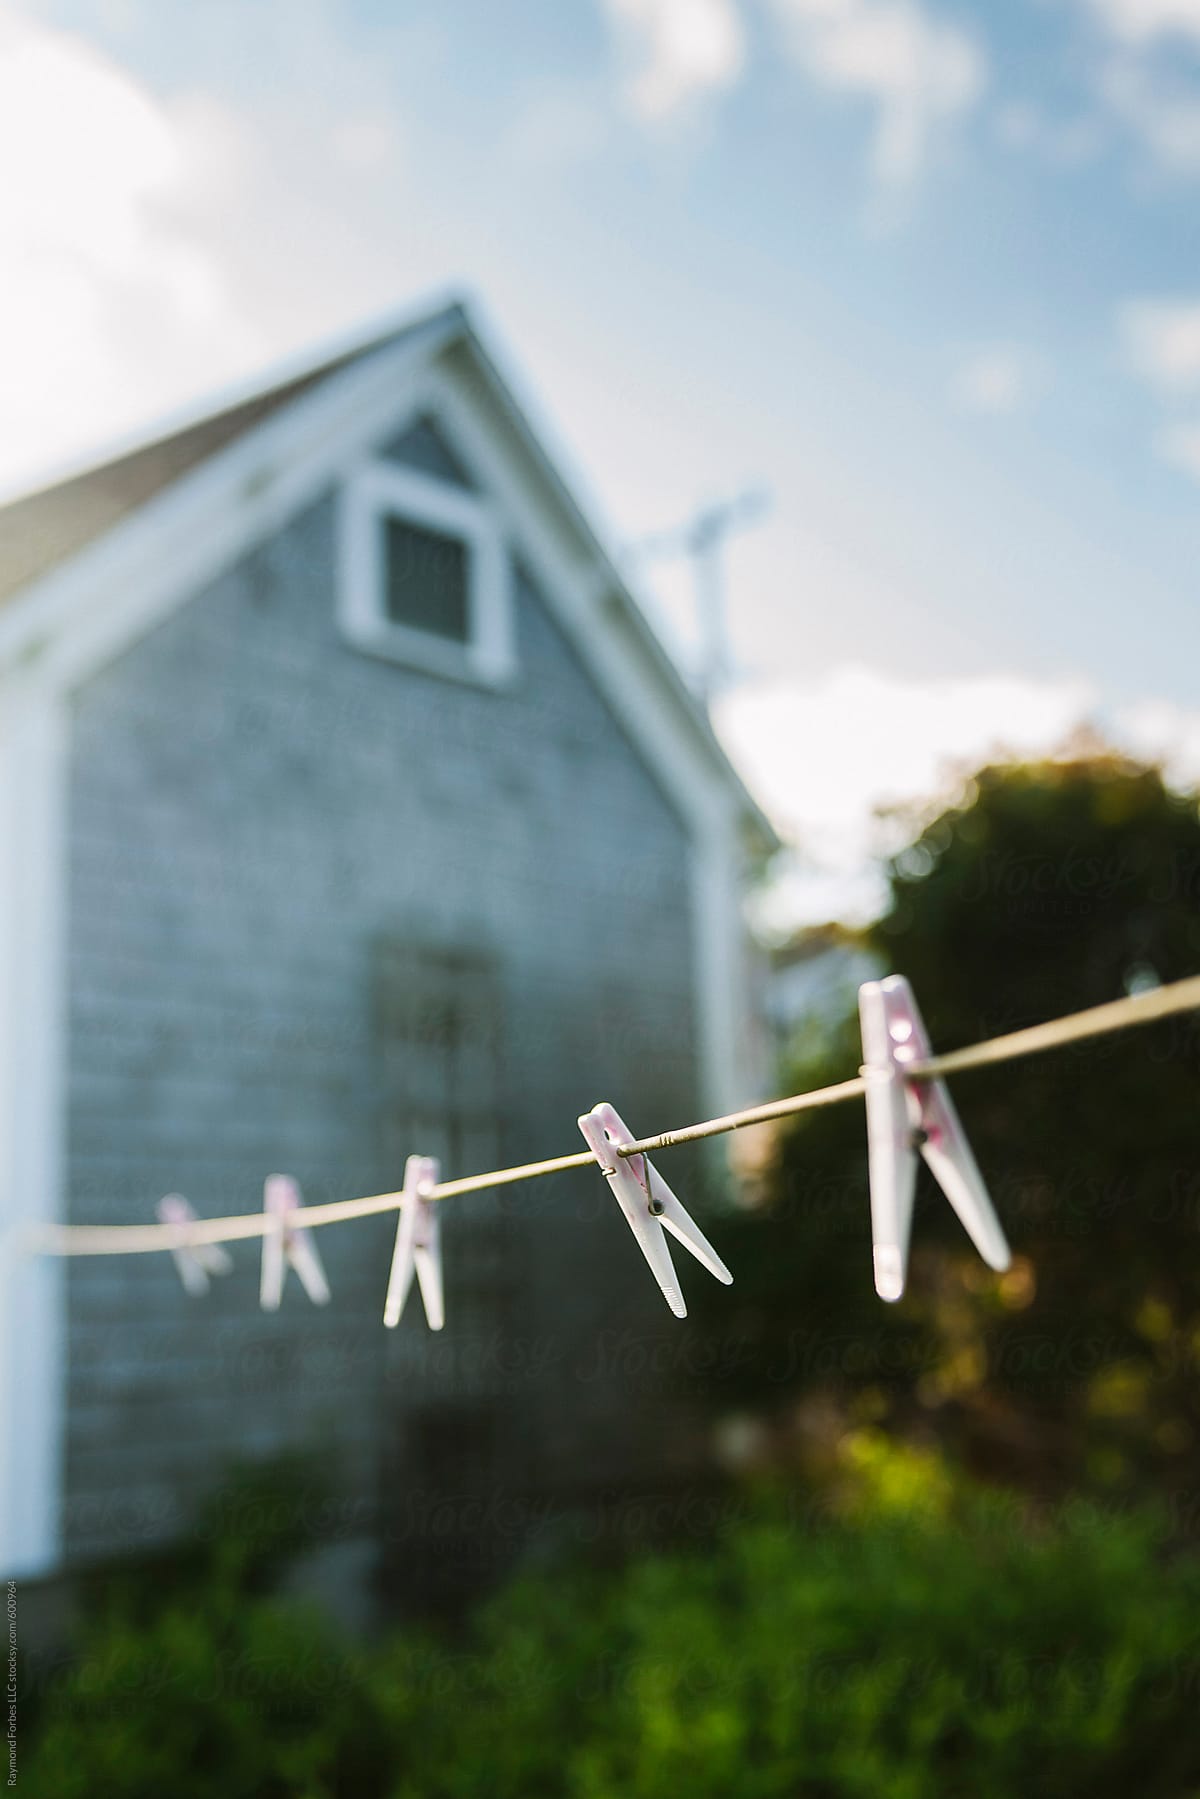 Clothespins on clothesline in Summer on Cape Cod Massachusetts